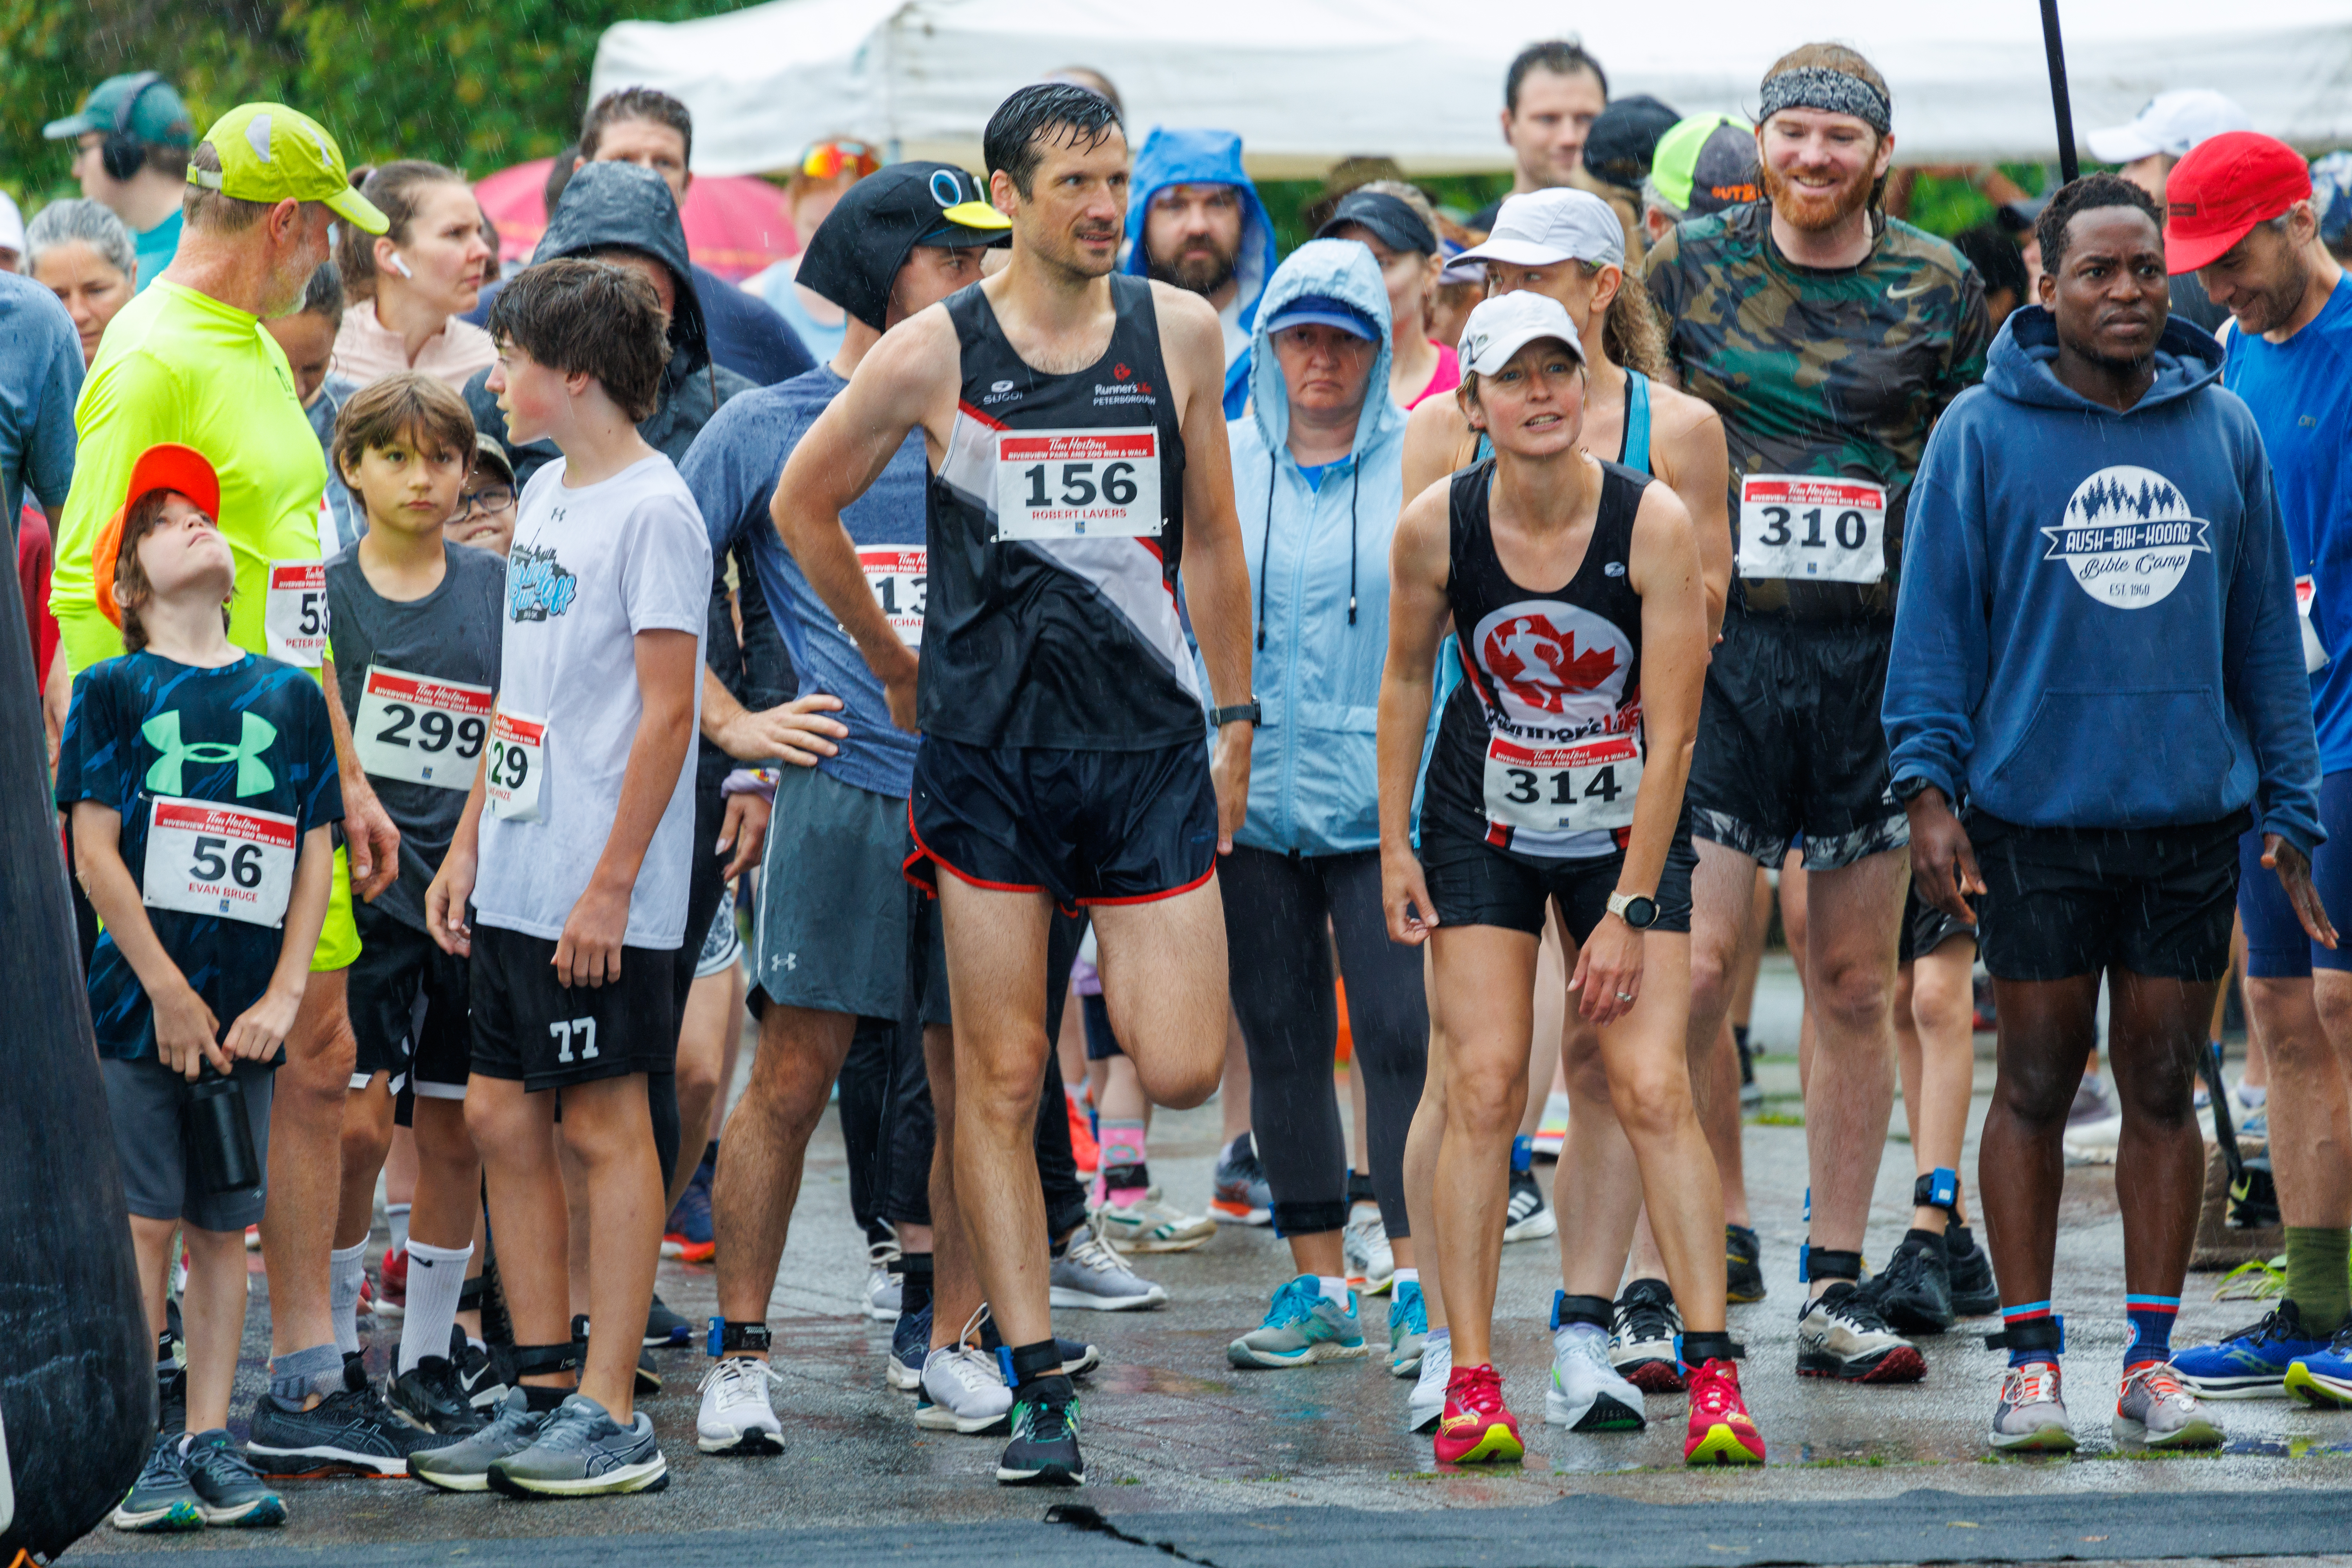 Group of runners at the starting line in wet weather